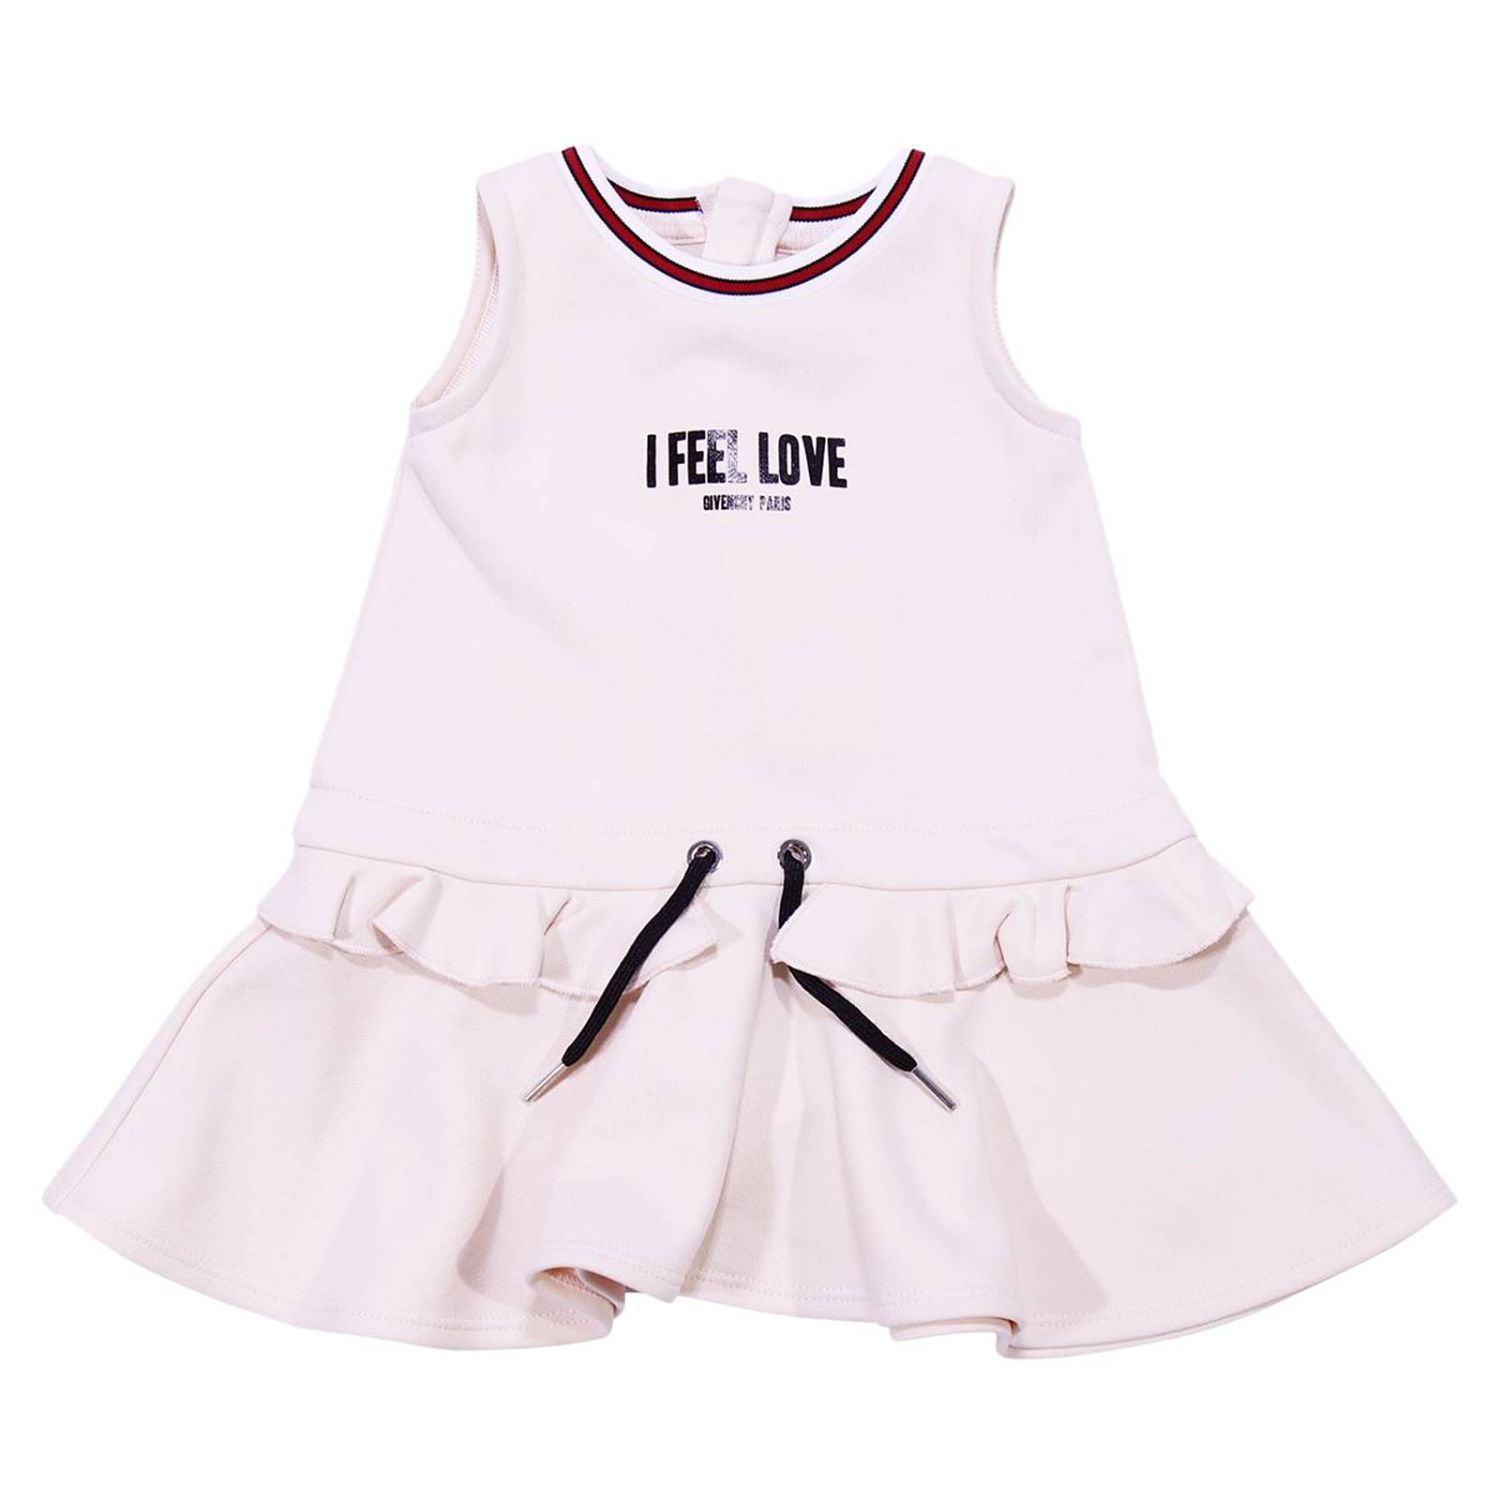 givenchy baby girl dress